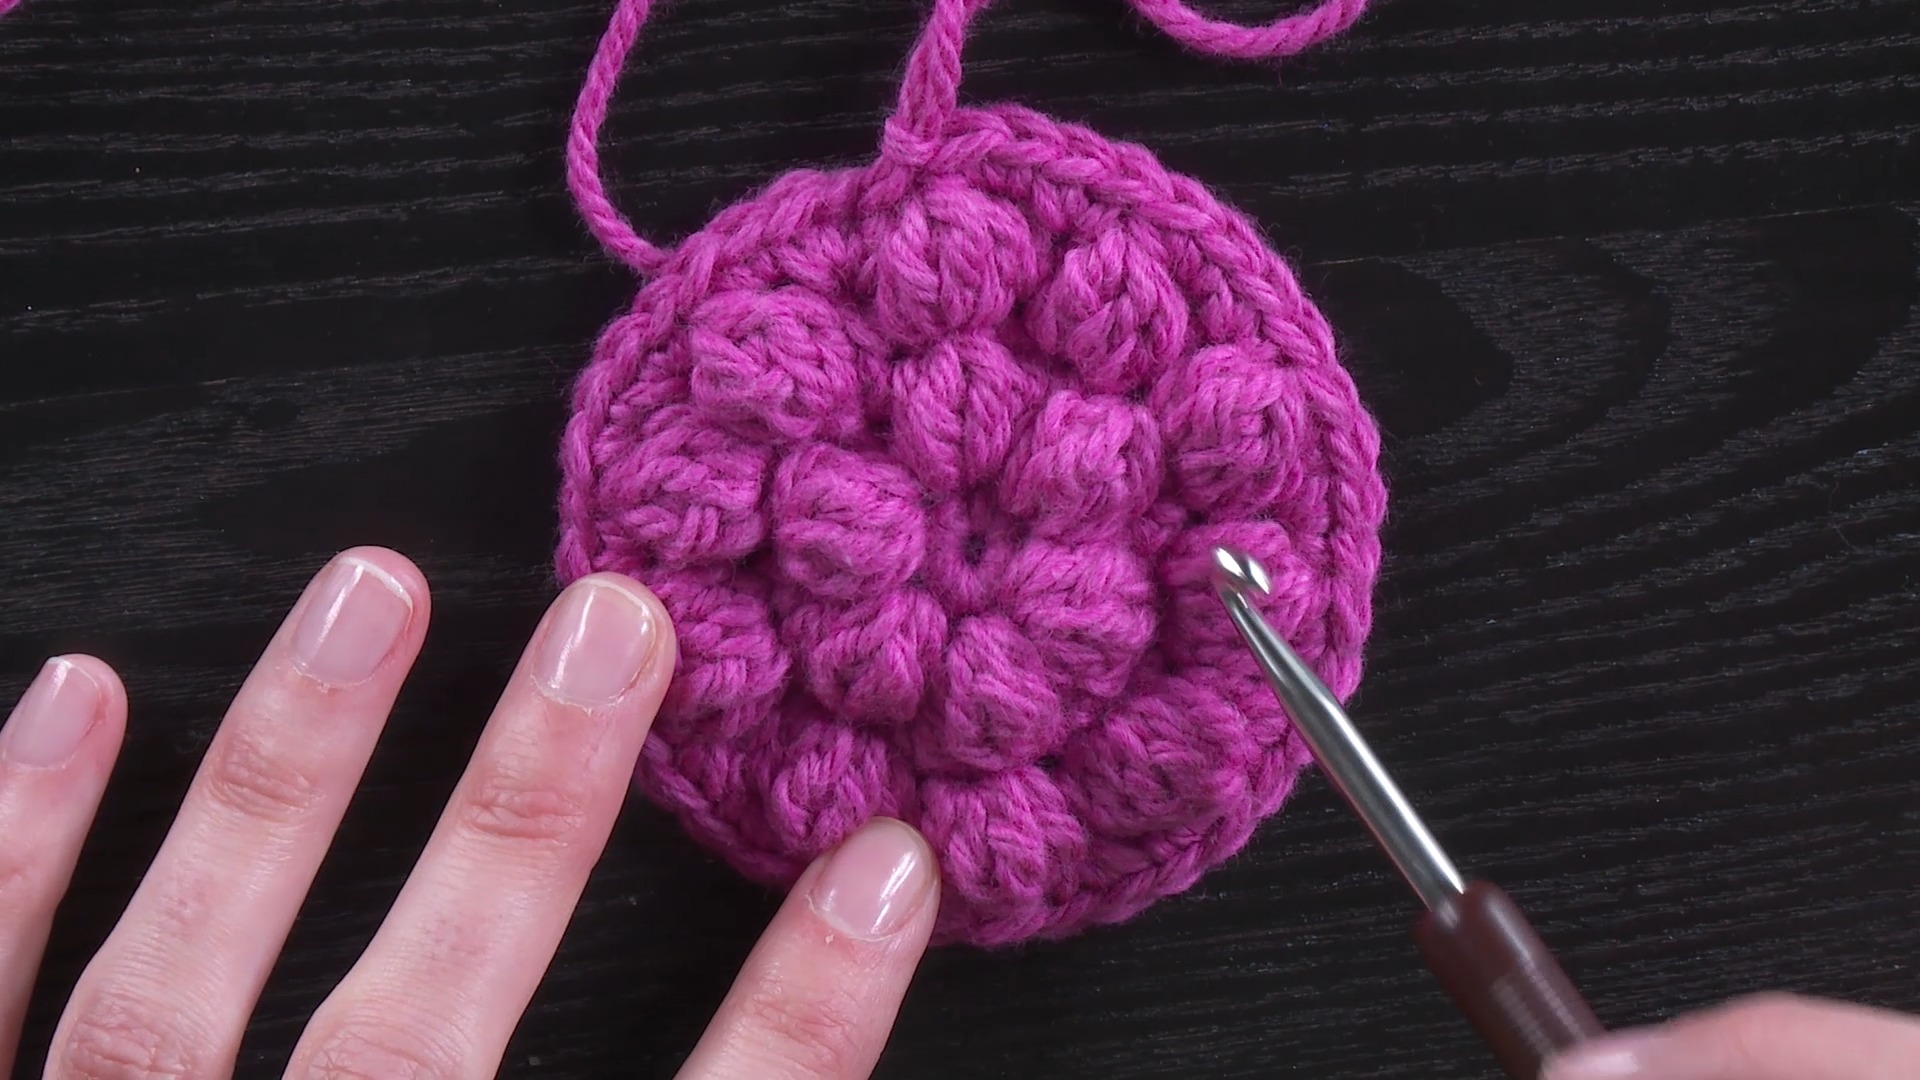 Session 3: Patterned Crochet in the Round